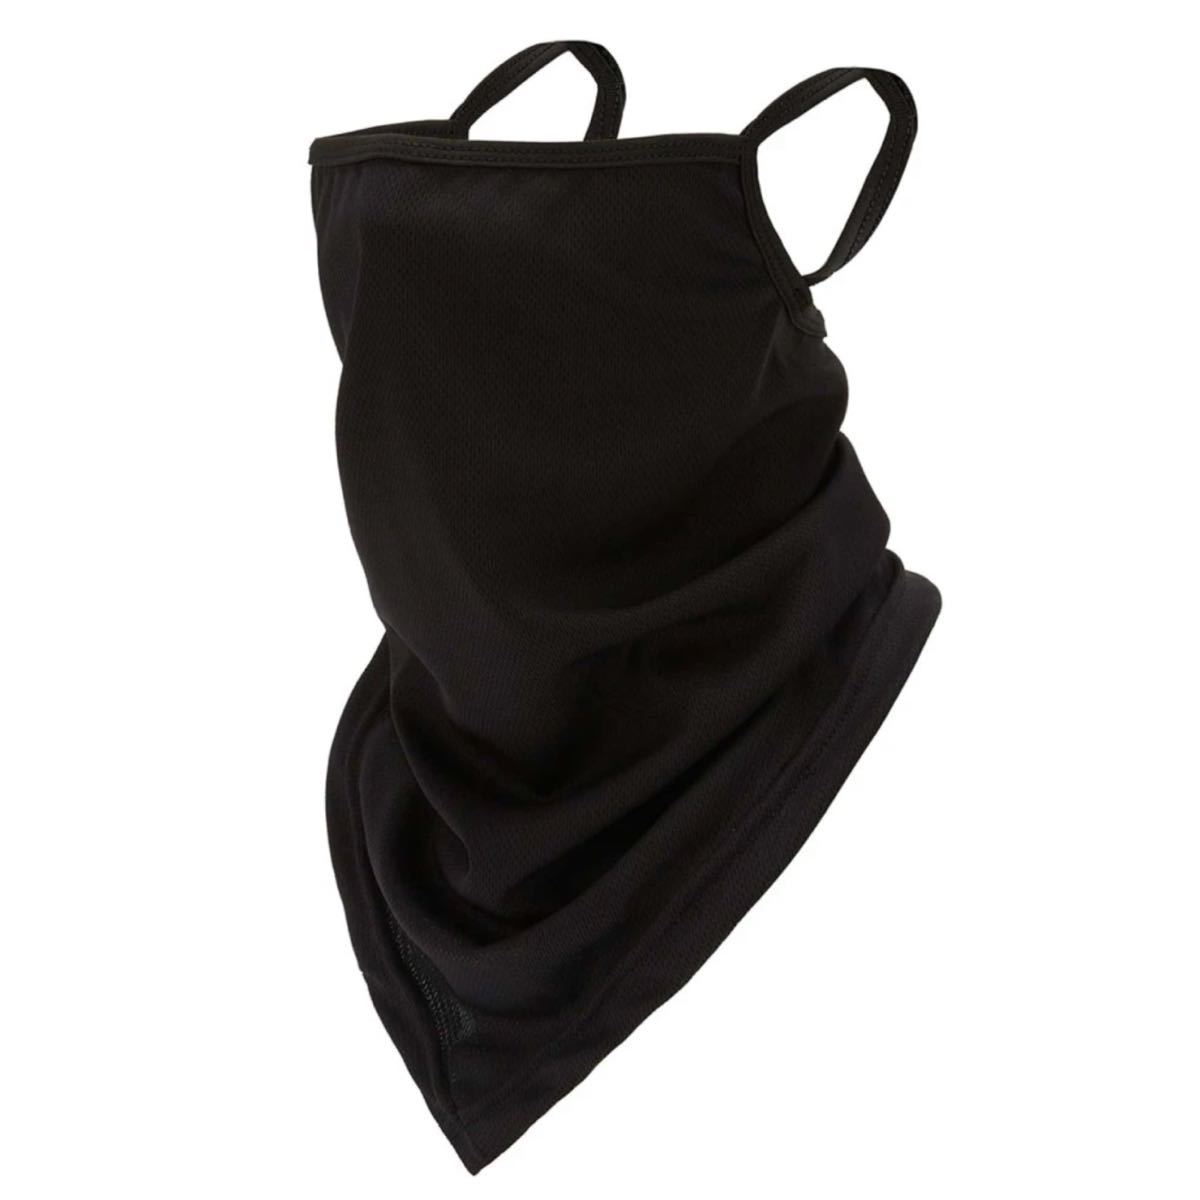  plain black year neck hook face mask sunscreen scarf outdoor cycling sport protection against cold dustproof . manner 